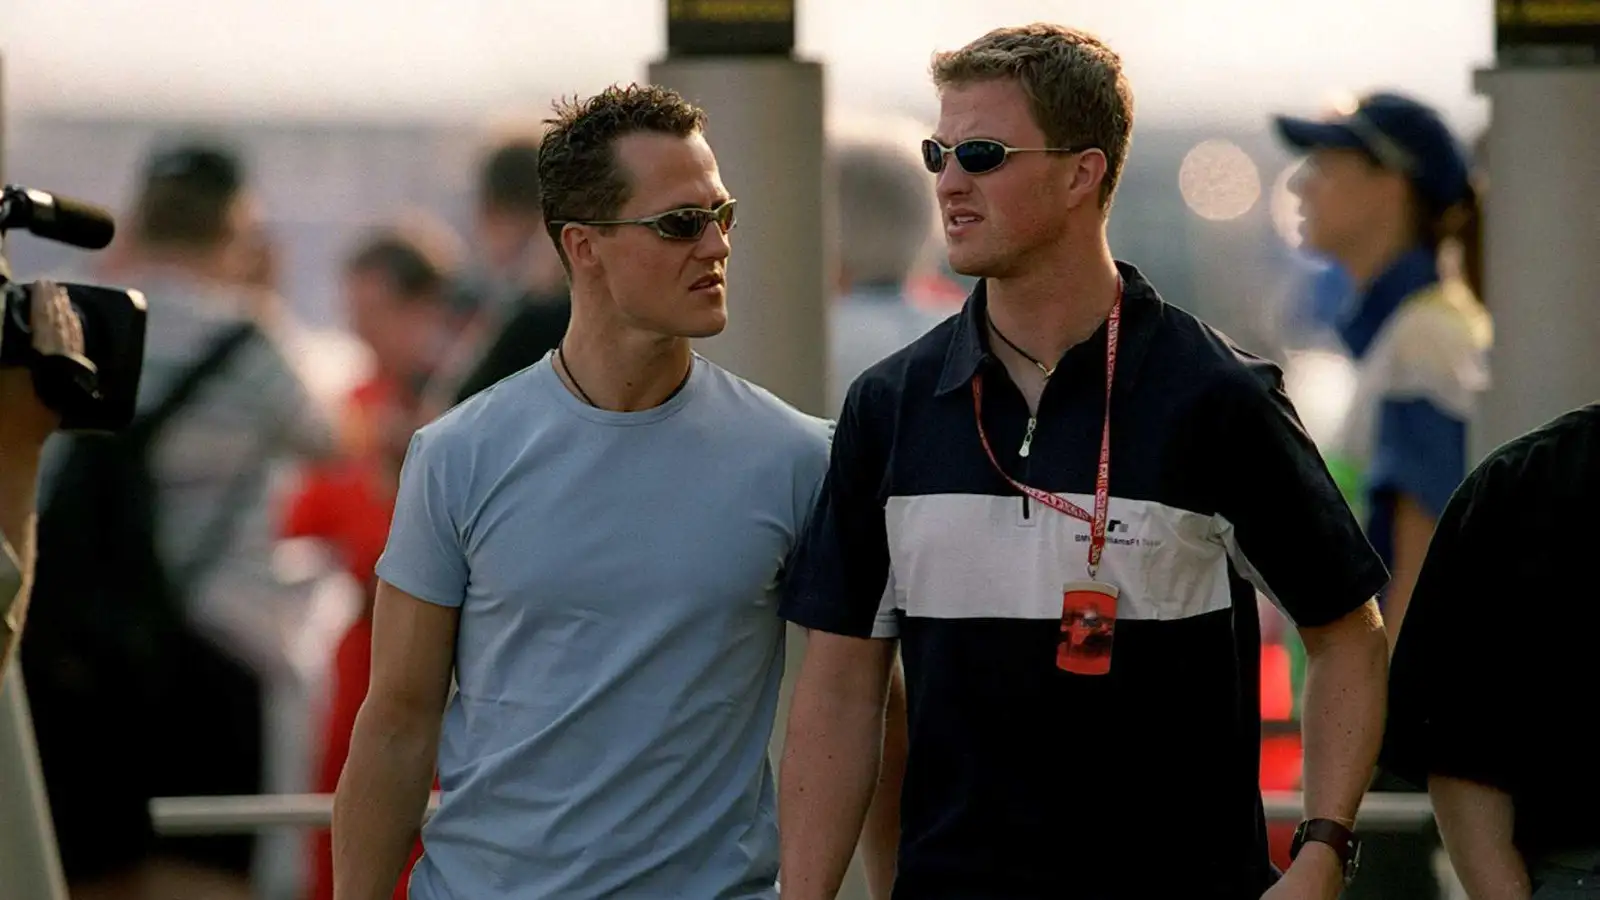 Michael Schumacher accident turning point discussed as 10th 